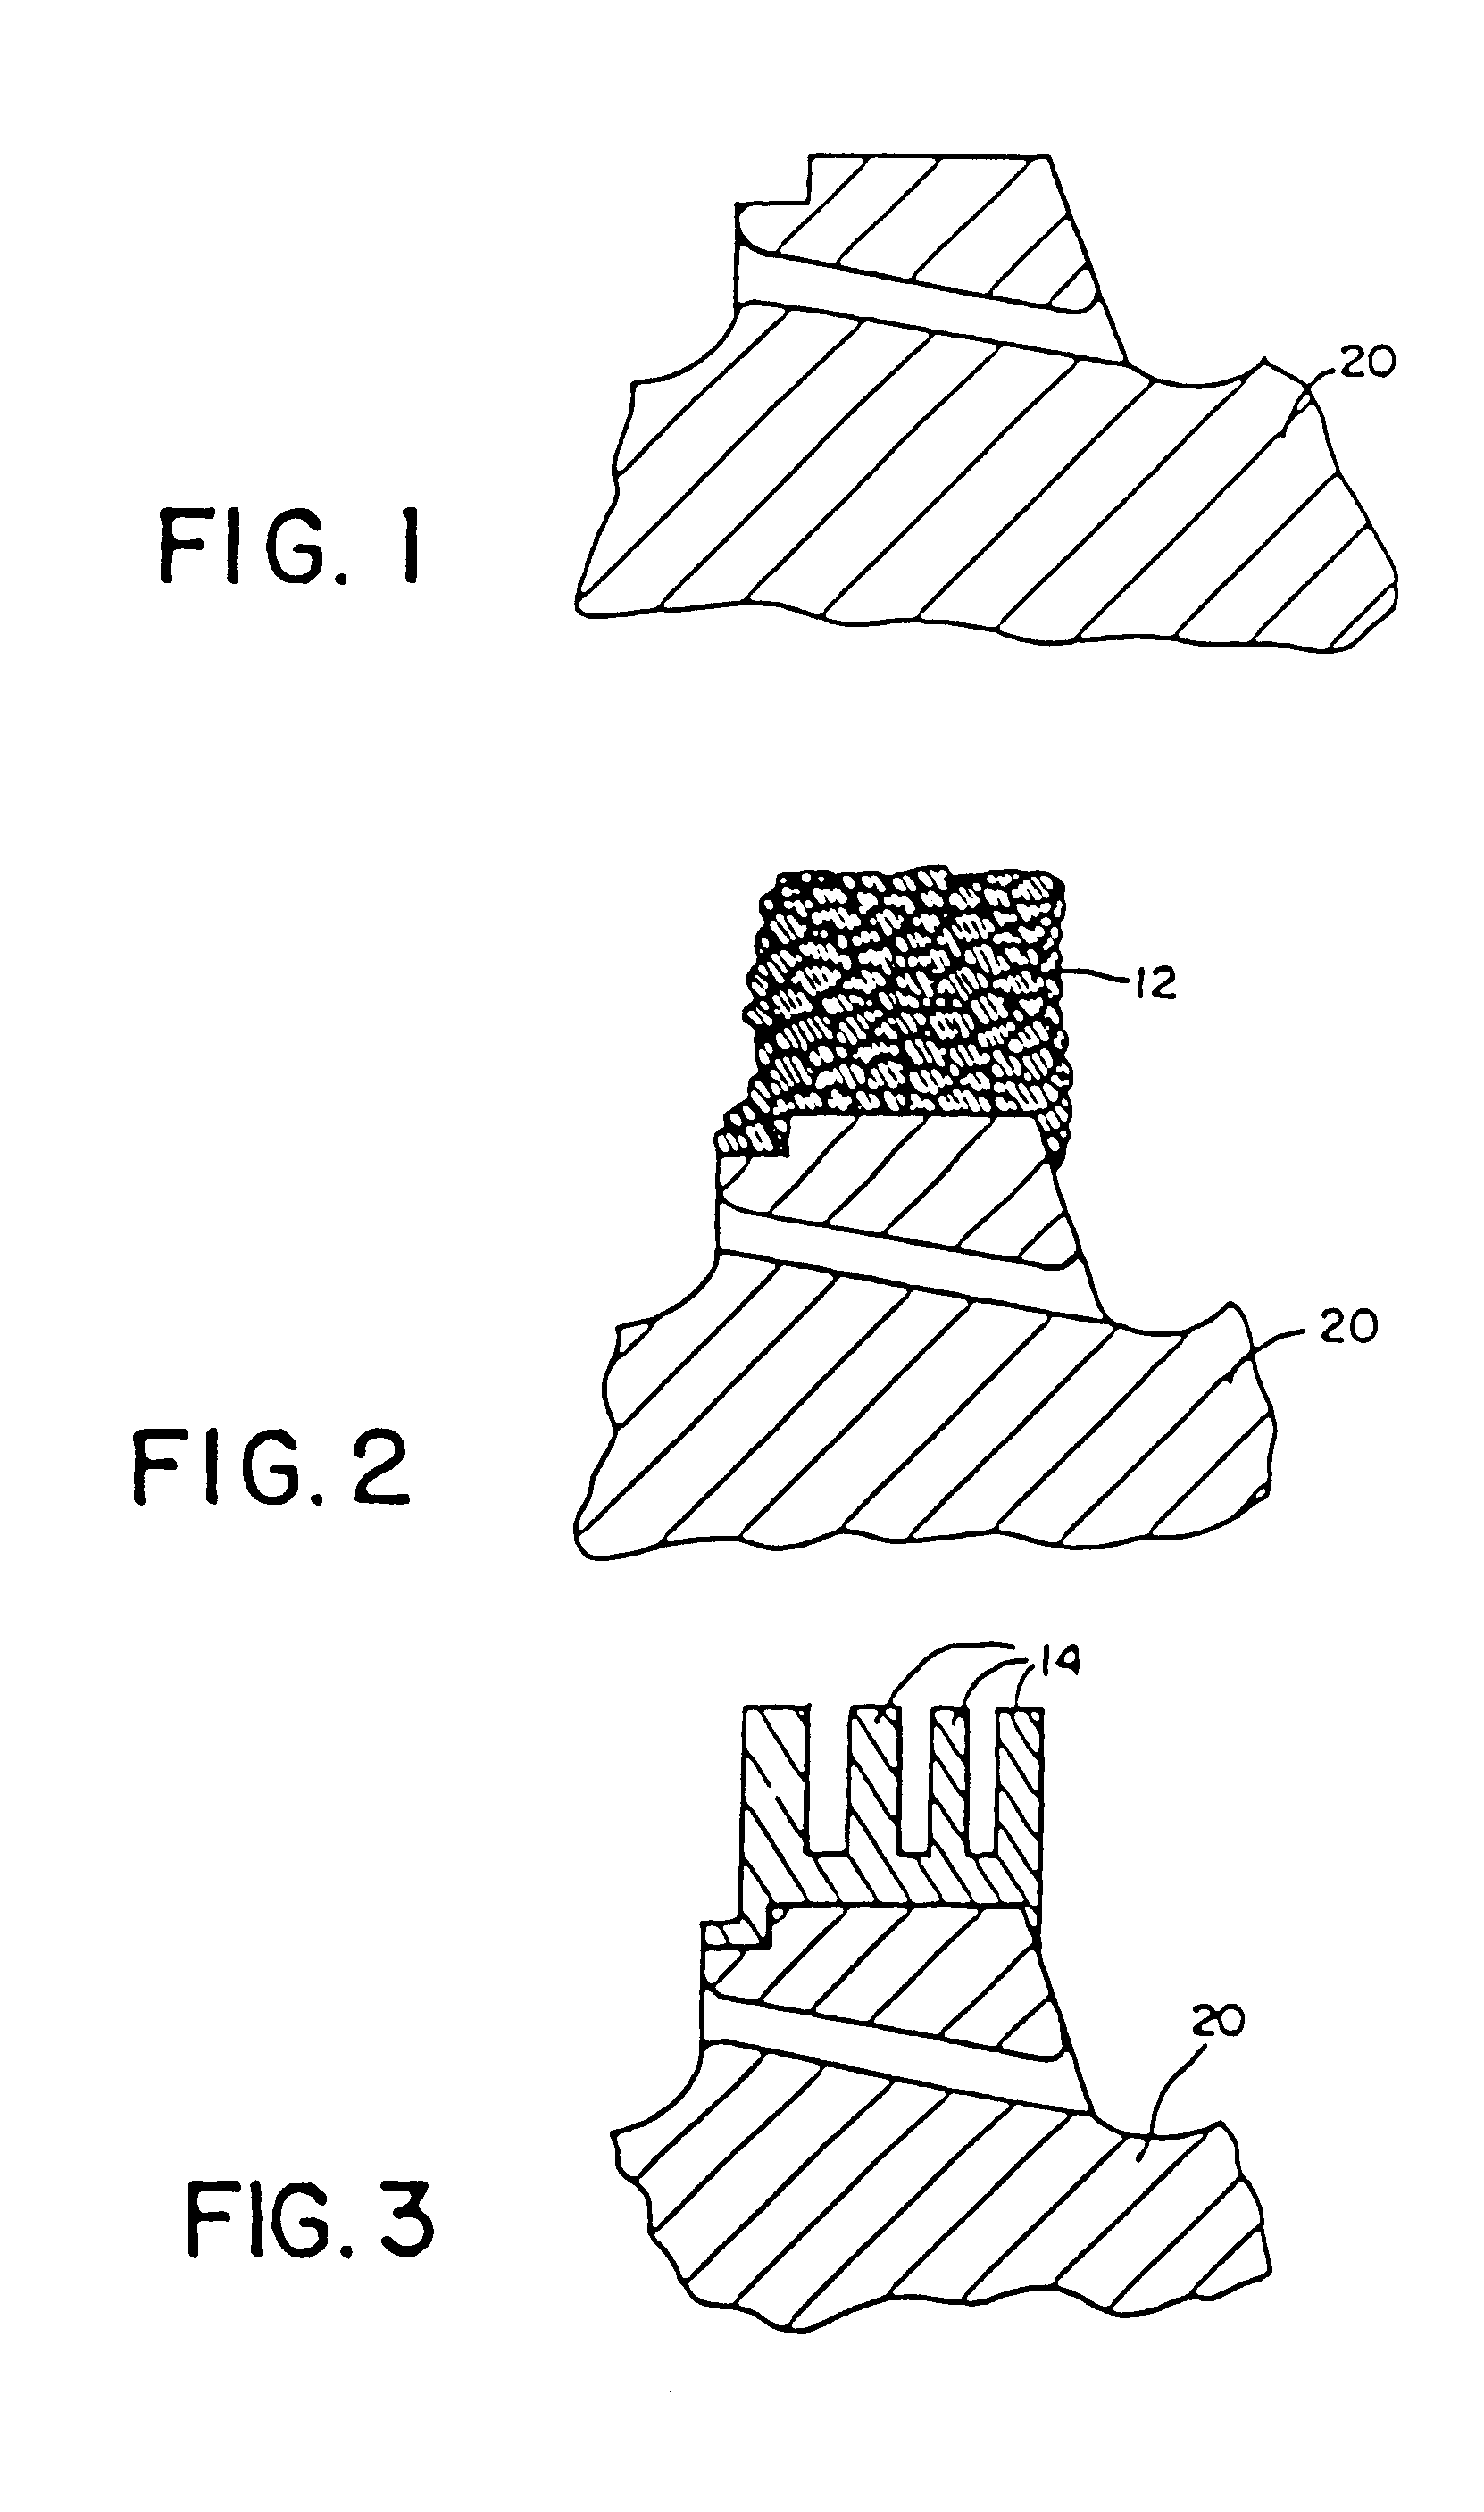 Turbine system having more failure resistant rotors and repair welding of low alloy ferrous turbine components by controlled weld build-up